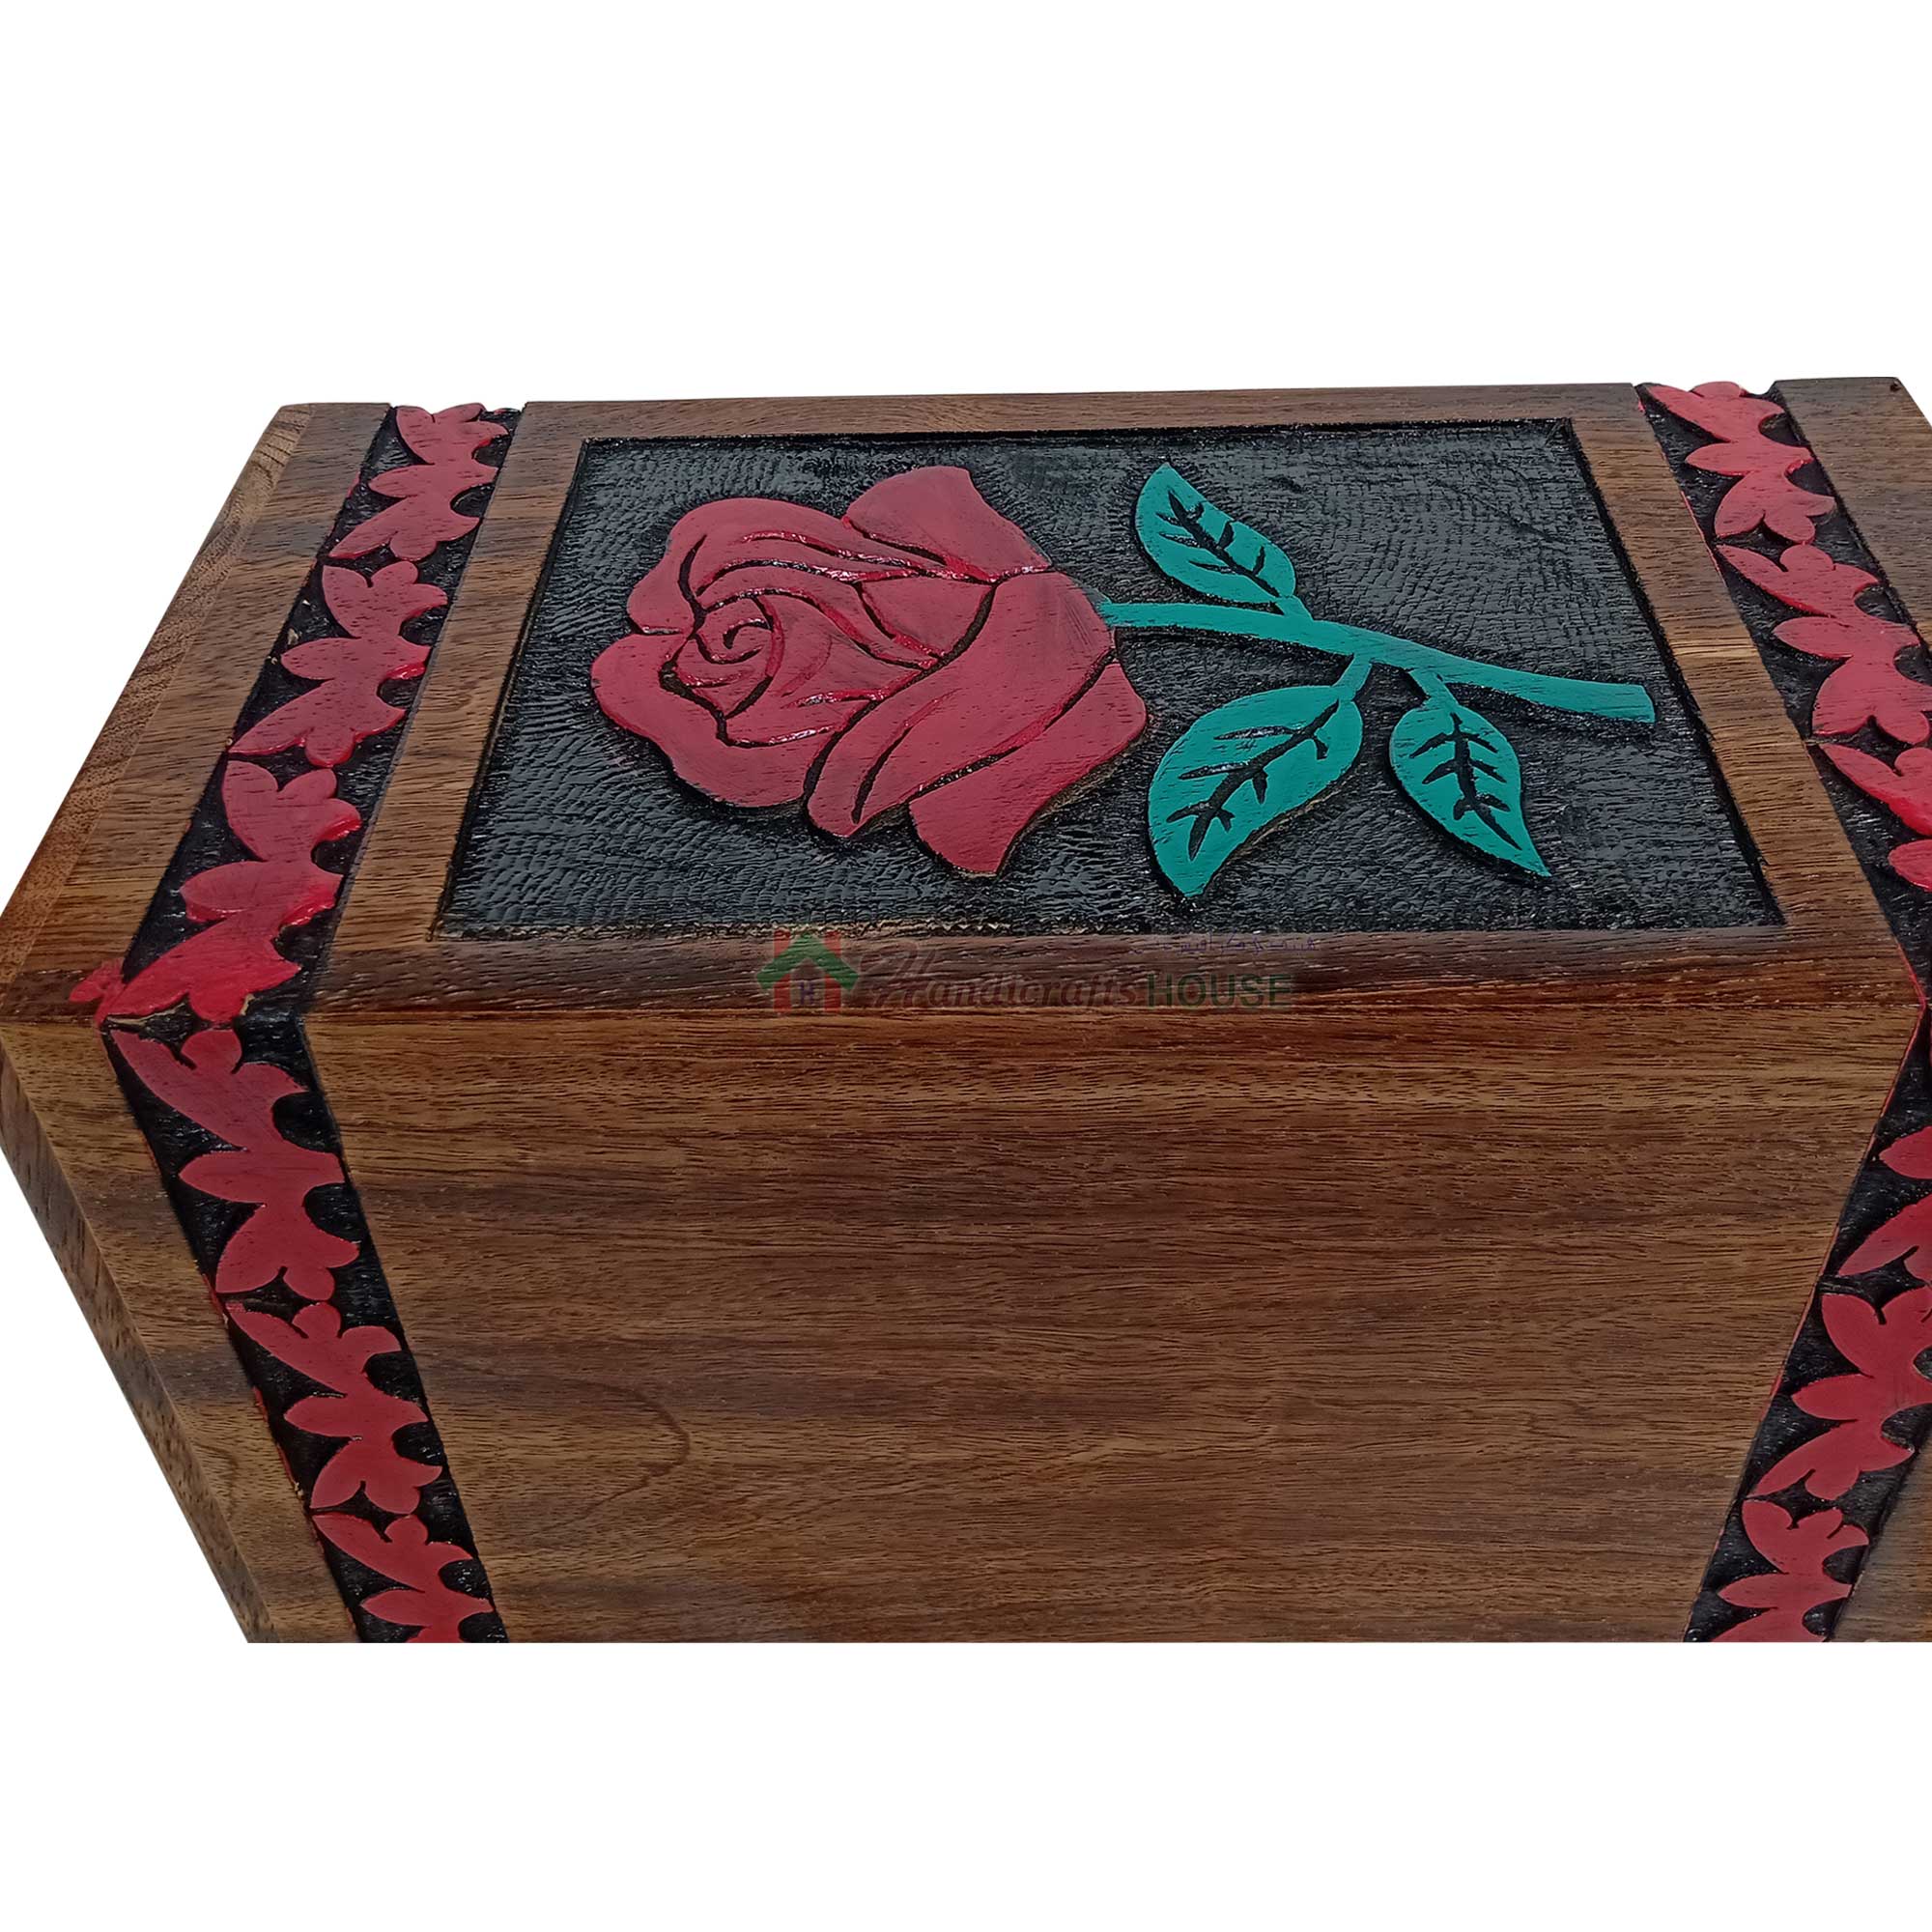 Hands Carving Flower Wooden Cremation Urns, Solid Wood Burial Box for Human or Pet Ashes Adult - Hardwood Memorial Large Urn for Loved One and Father